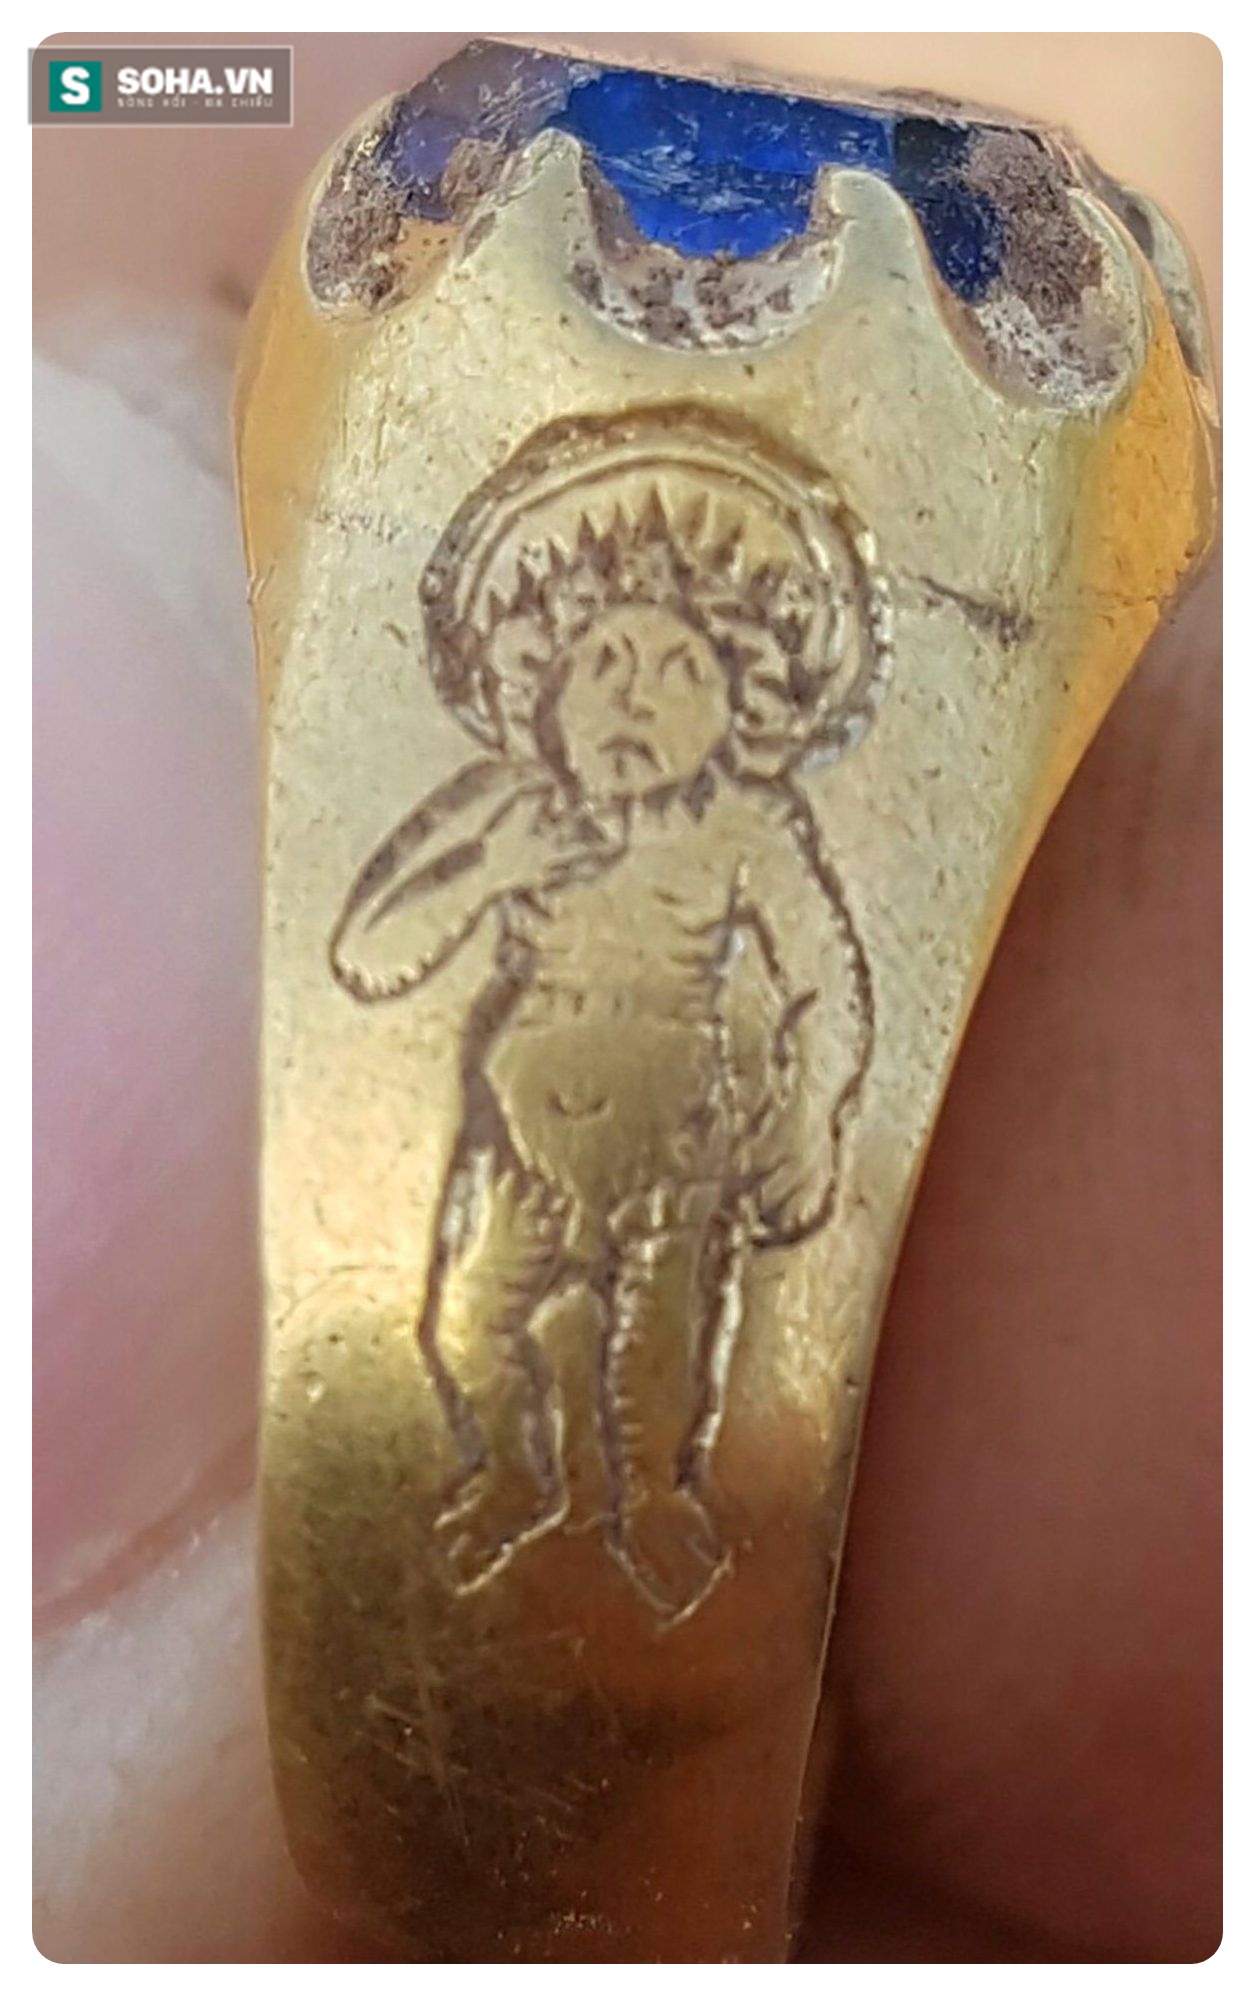 A treasure hunter suddenly found an antique ring worth $90,000 near the Robin Hood forest - Photo 2.